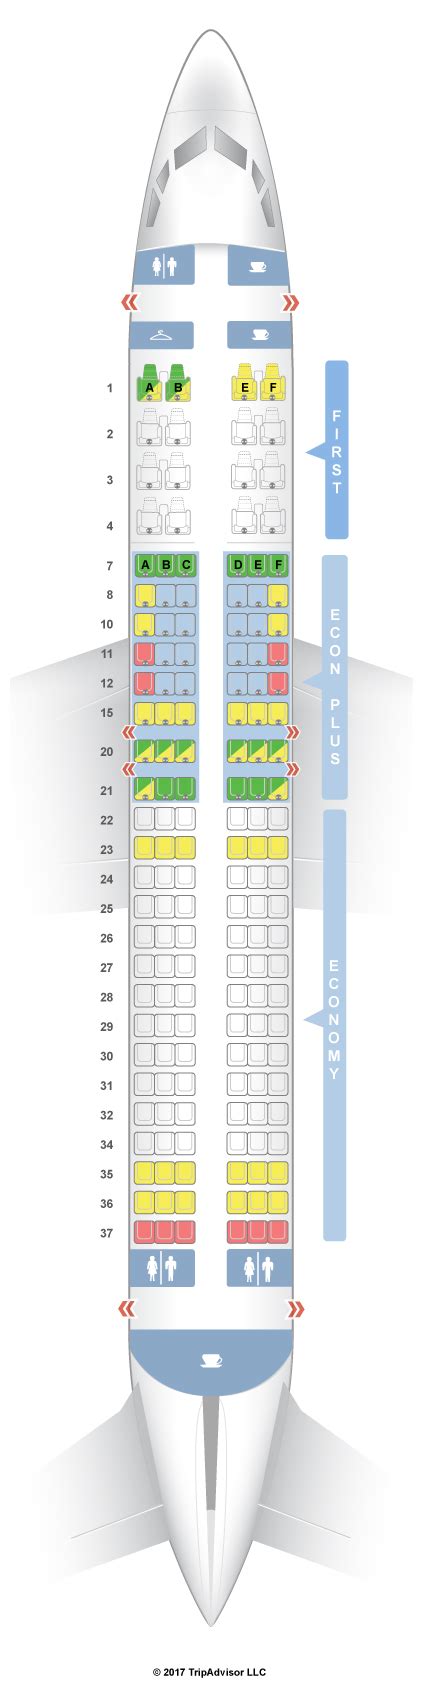 united airlines boeing 737-800 seating chart